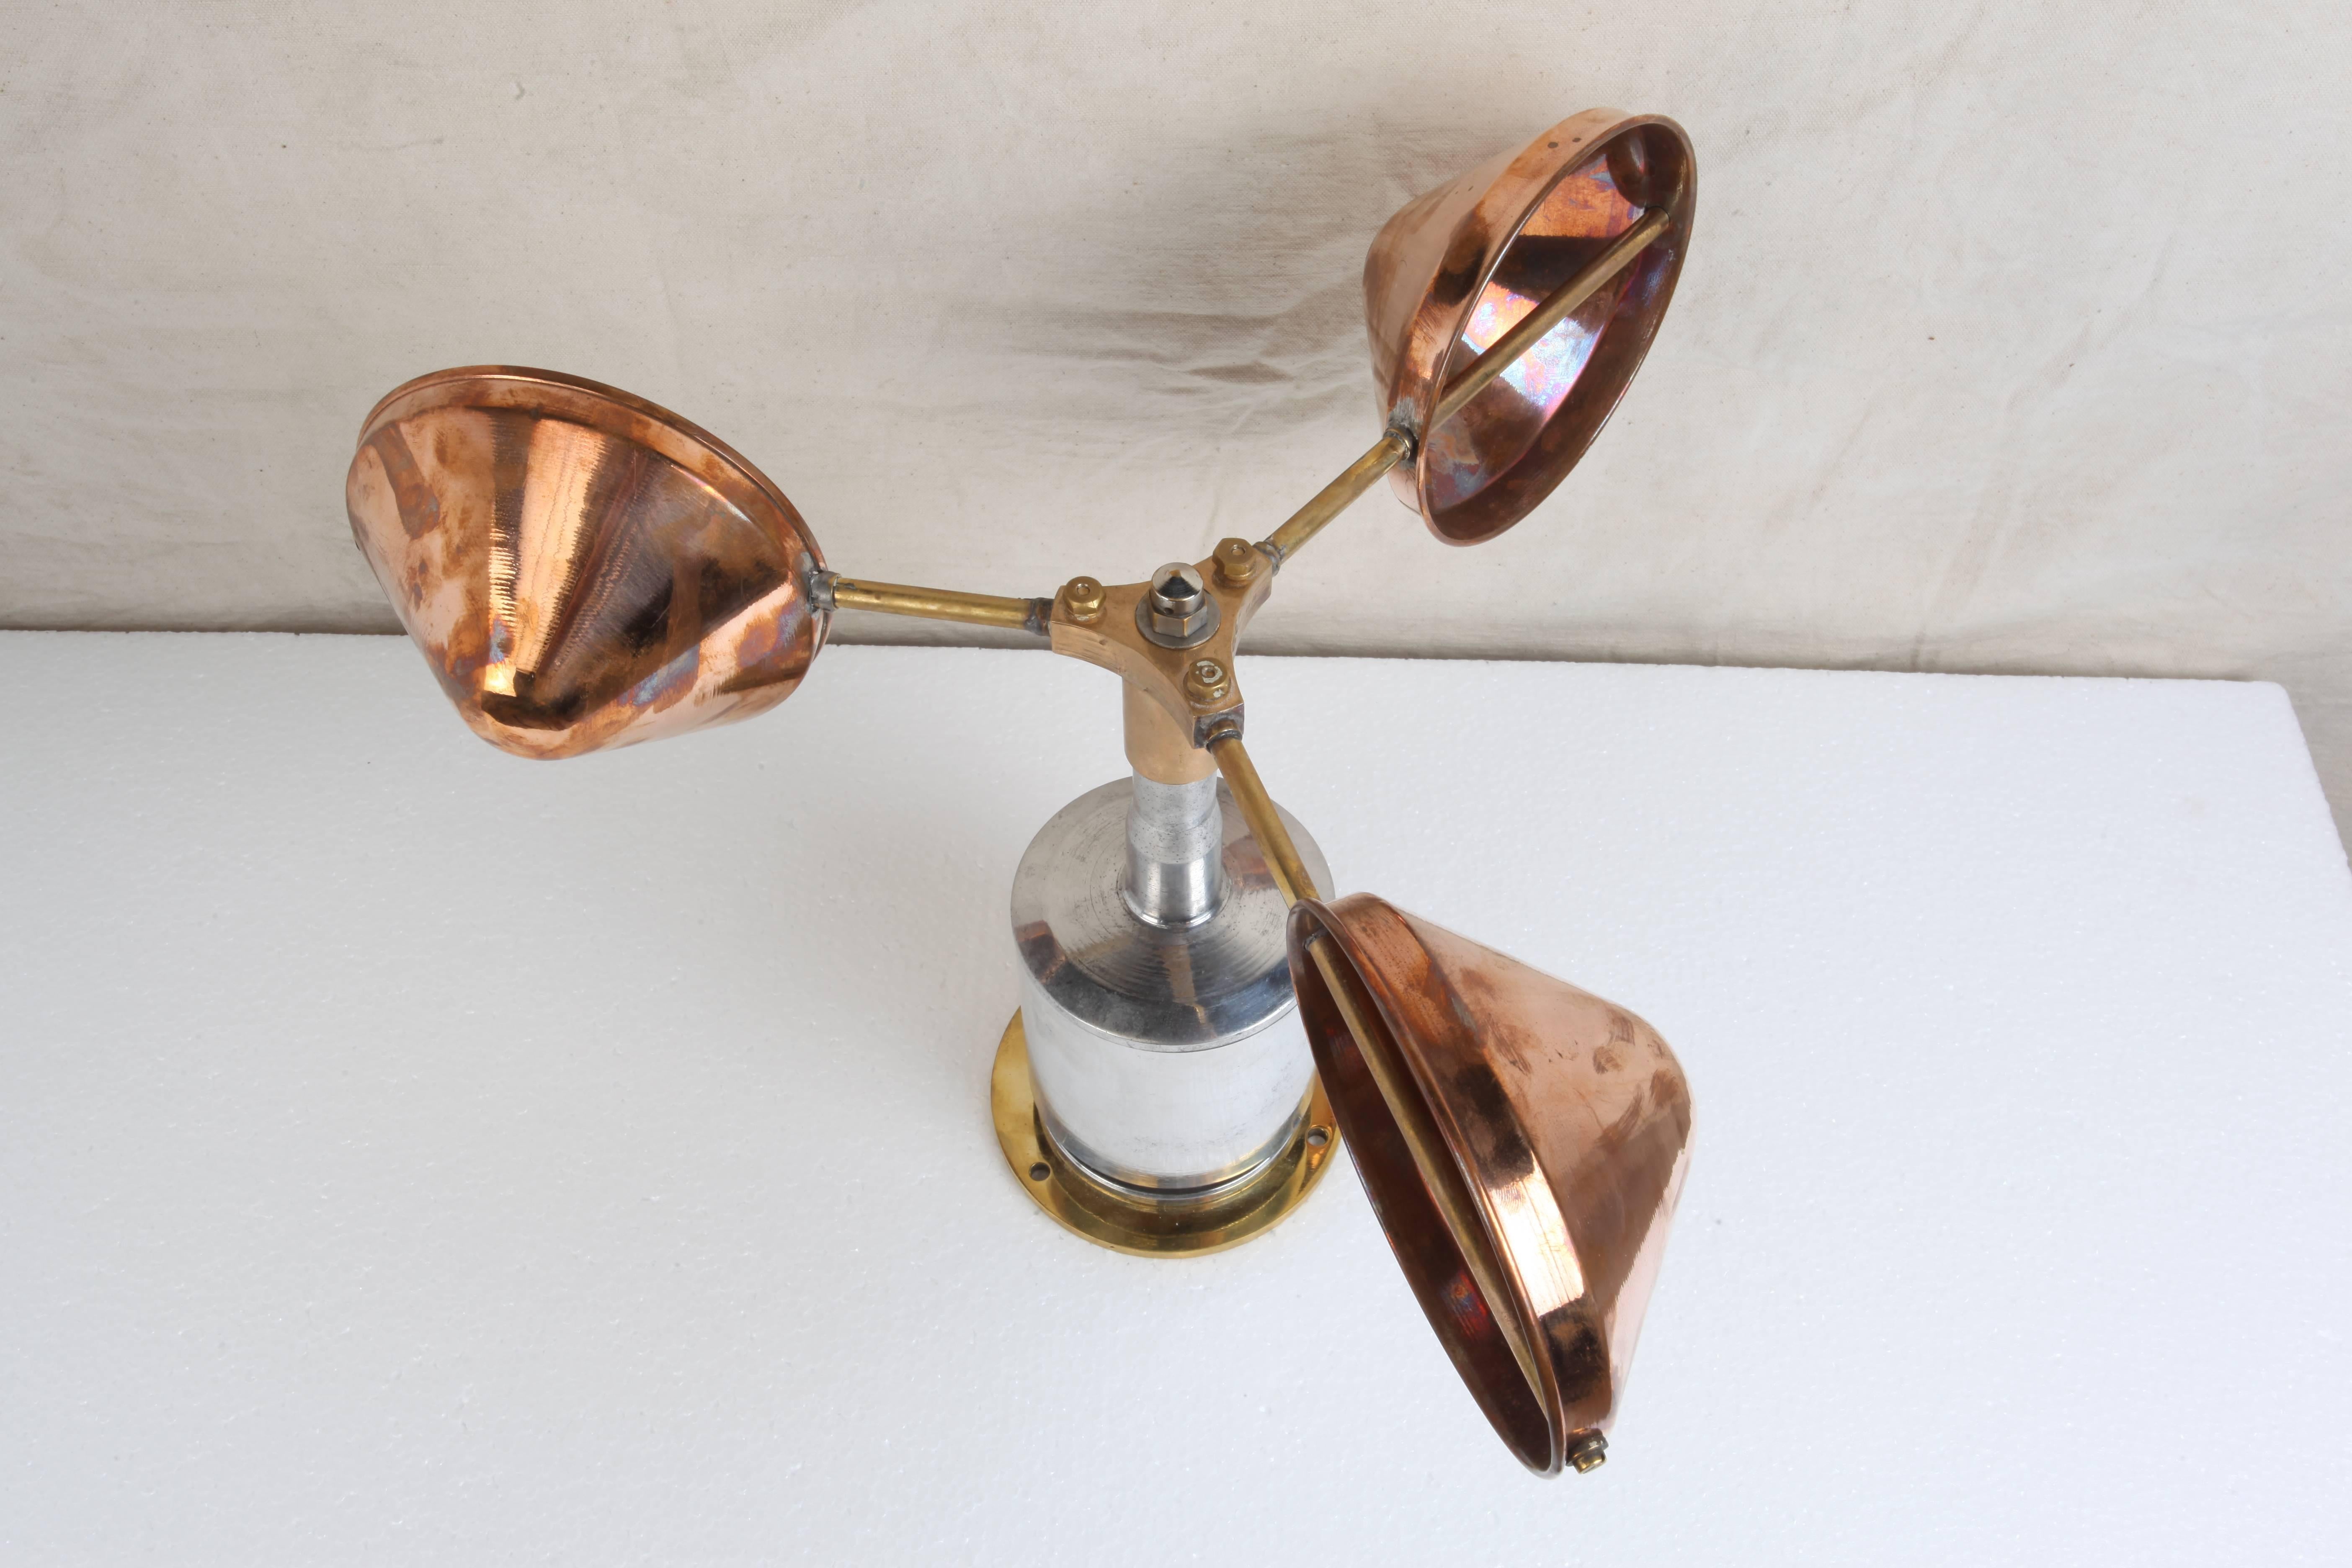 A functional ship's anemometer, used in measuring wind speed. Made of copper, brass and chrome. Can be used outside or in and the copper cups move freely. Polished and salvaged from decommissioned ships. Measure: Base is 5 inch diameter.